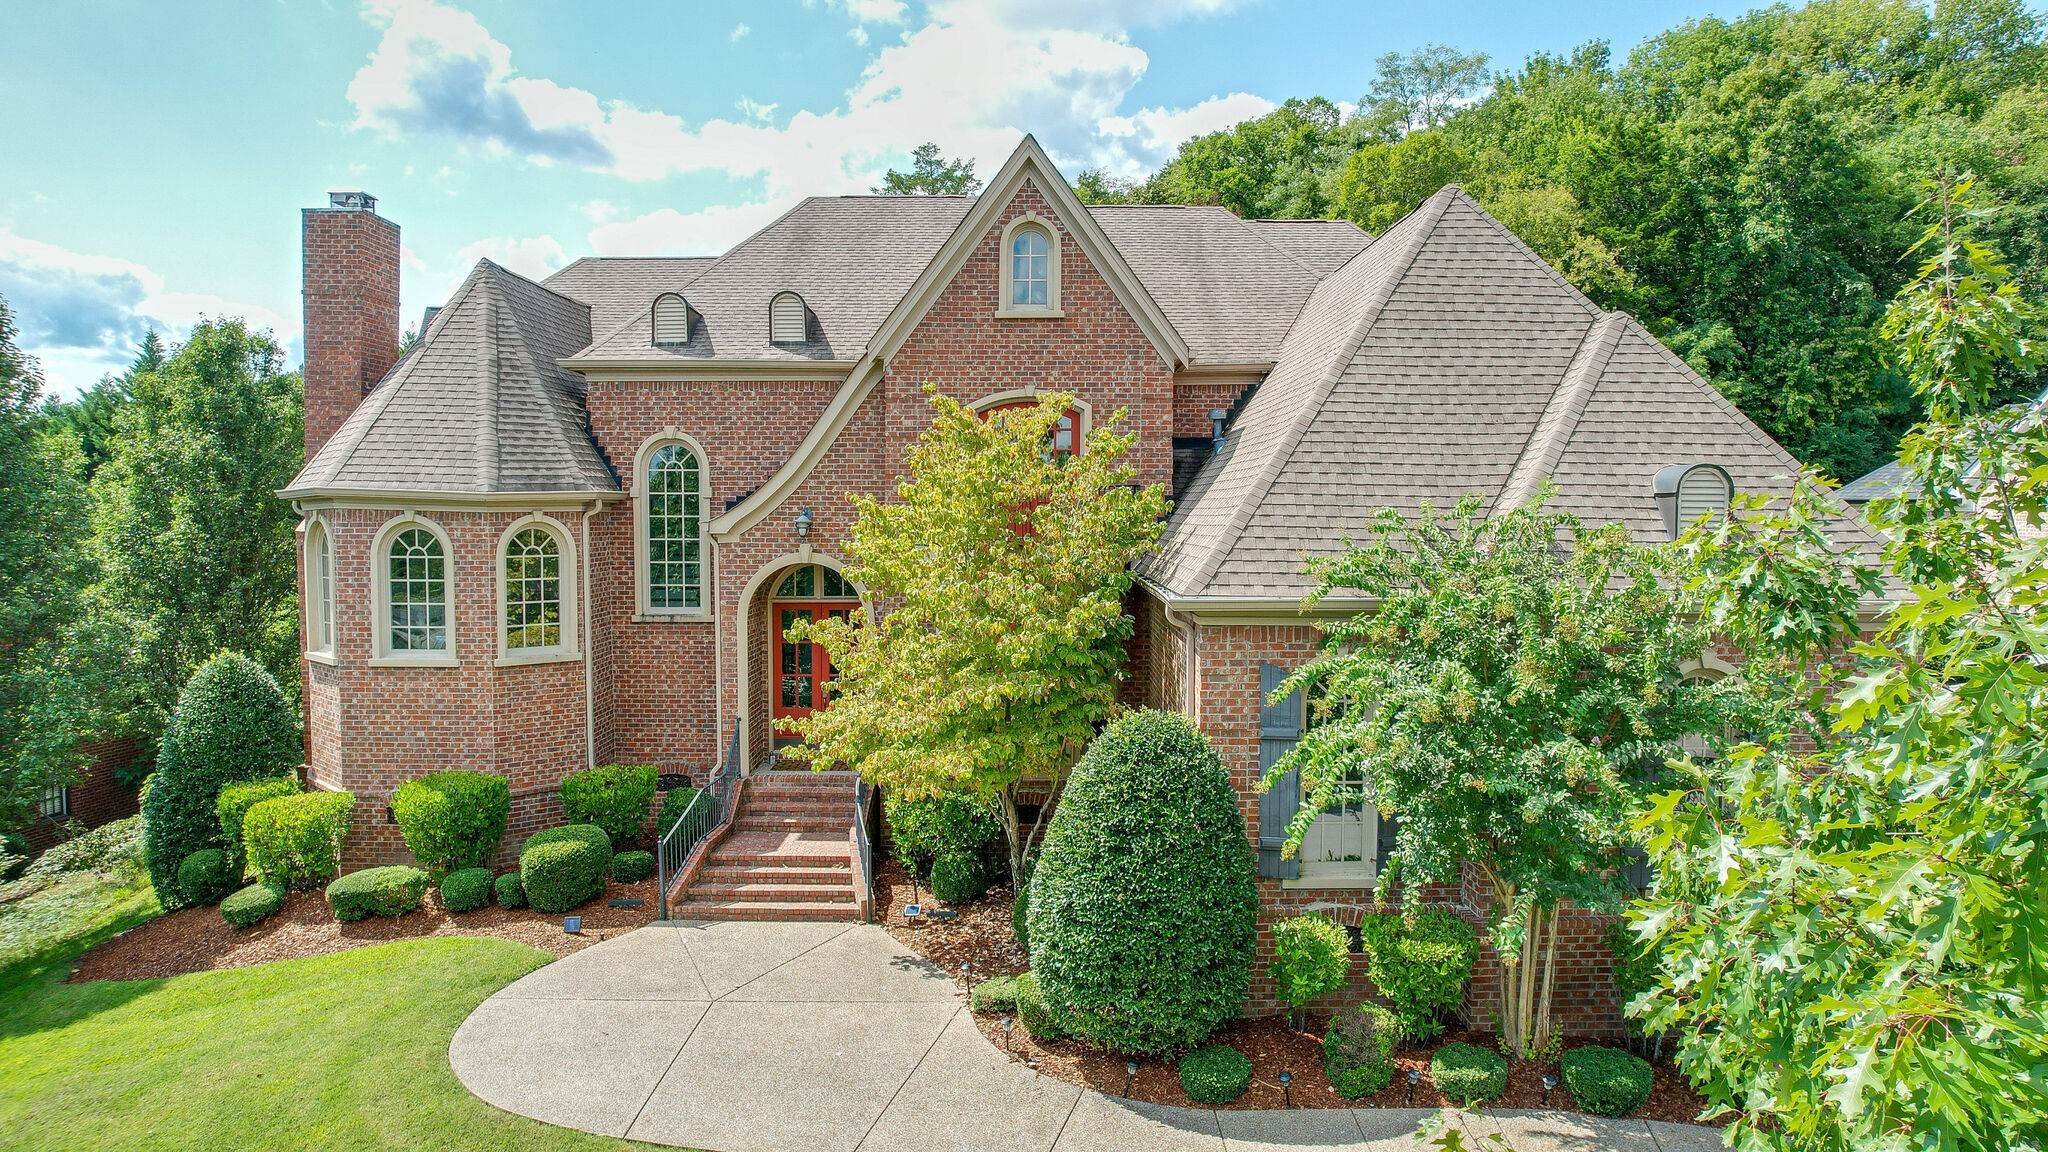 Single Family Homes for Sale at 24 Missionary Dr, Brentwood, TN, 37027 24 Missionary Dr Brentwood, Tennessee 37027 United States